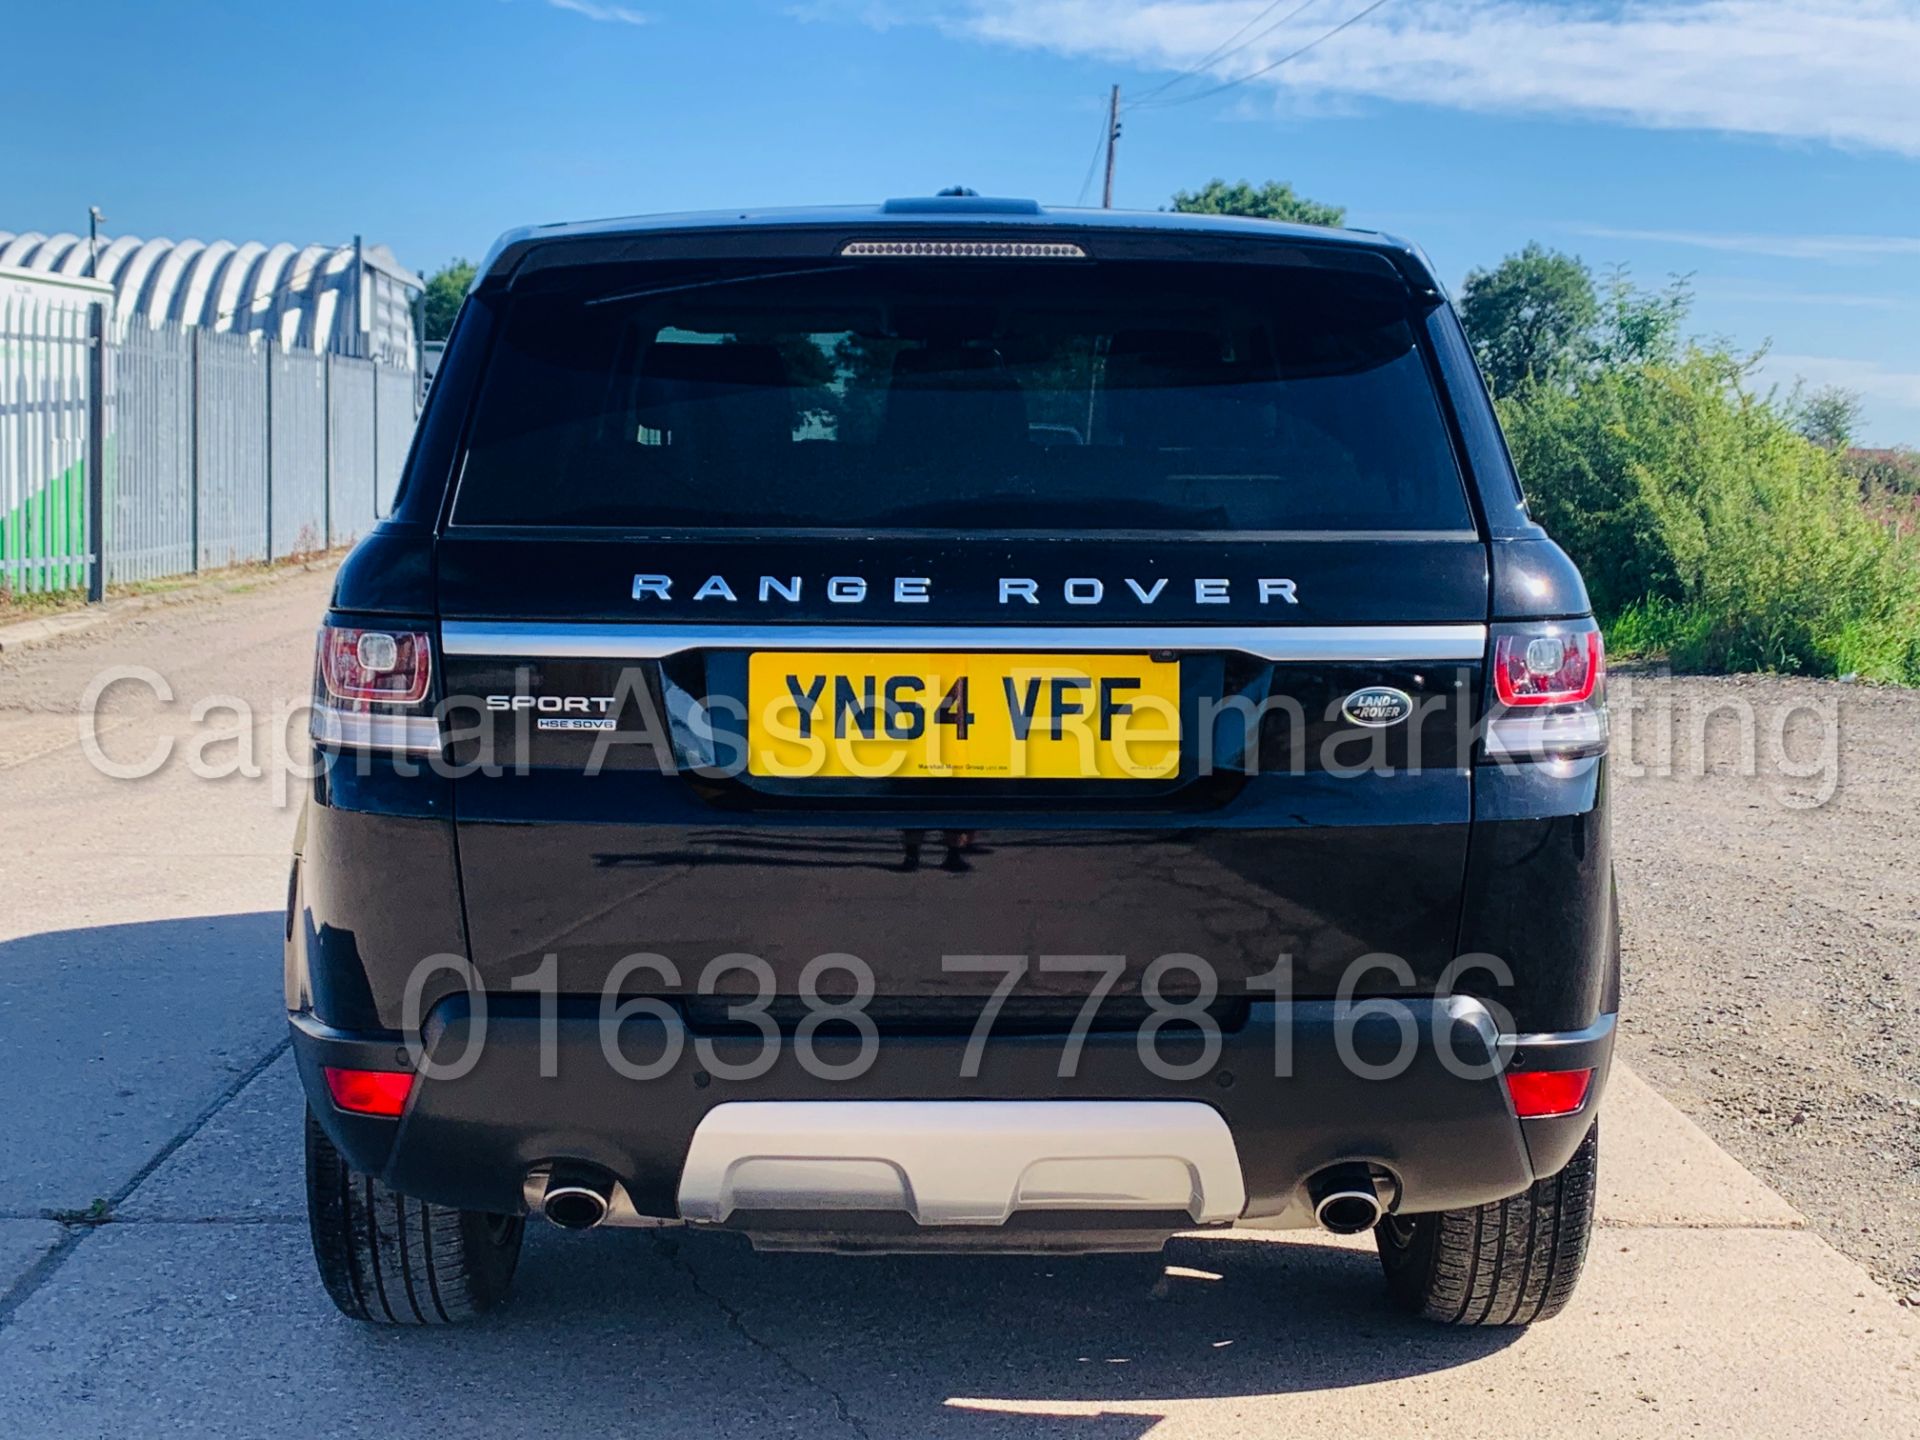 (On Sale) RANGE ROVER SPORT *HSE* 5 DOOR SUV (2015 MODEL) '3.0 SDV6 - 8 SPEED AUTO' *FULLY LOADED* - Image 11 of 59